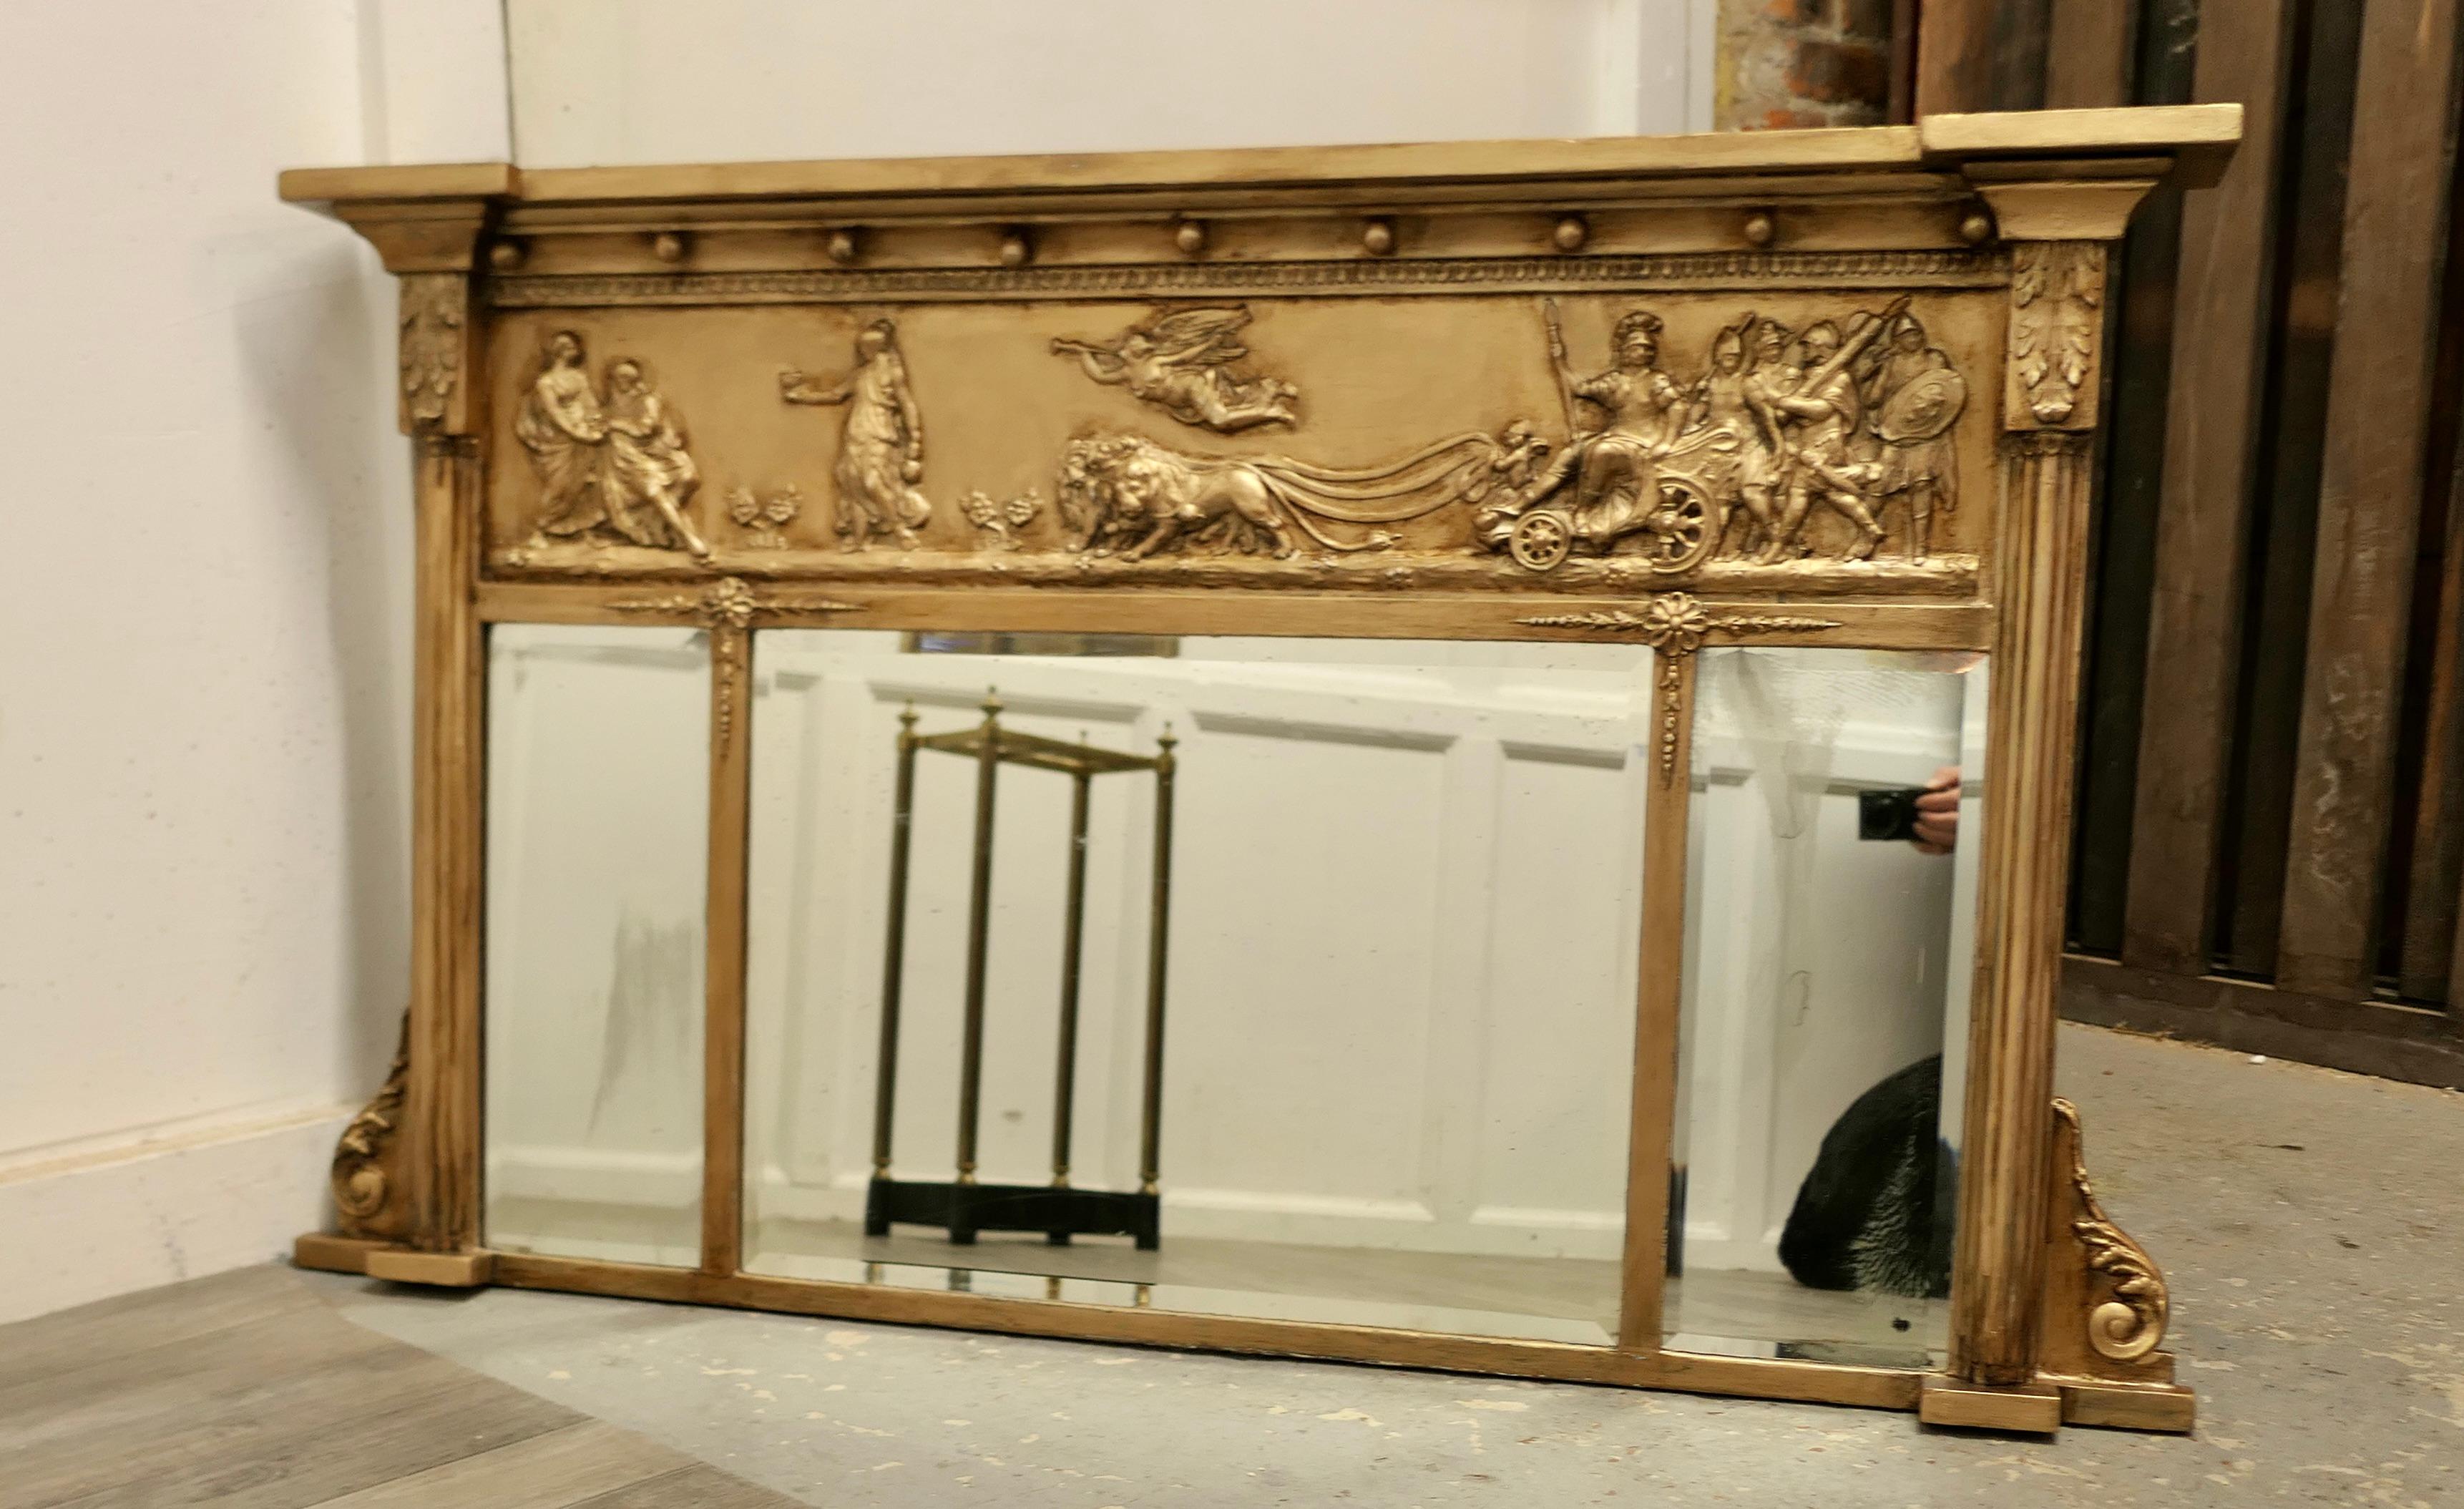 Regency triple plate gilt mirror or over mantle 

The Regency carved Frame is a rectangular shape, it has corinthian columns at either side and a neoclassical scene in Gesso along the top, depicting Gods and chariot racing The mirror has three